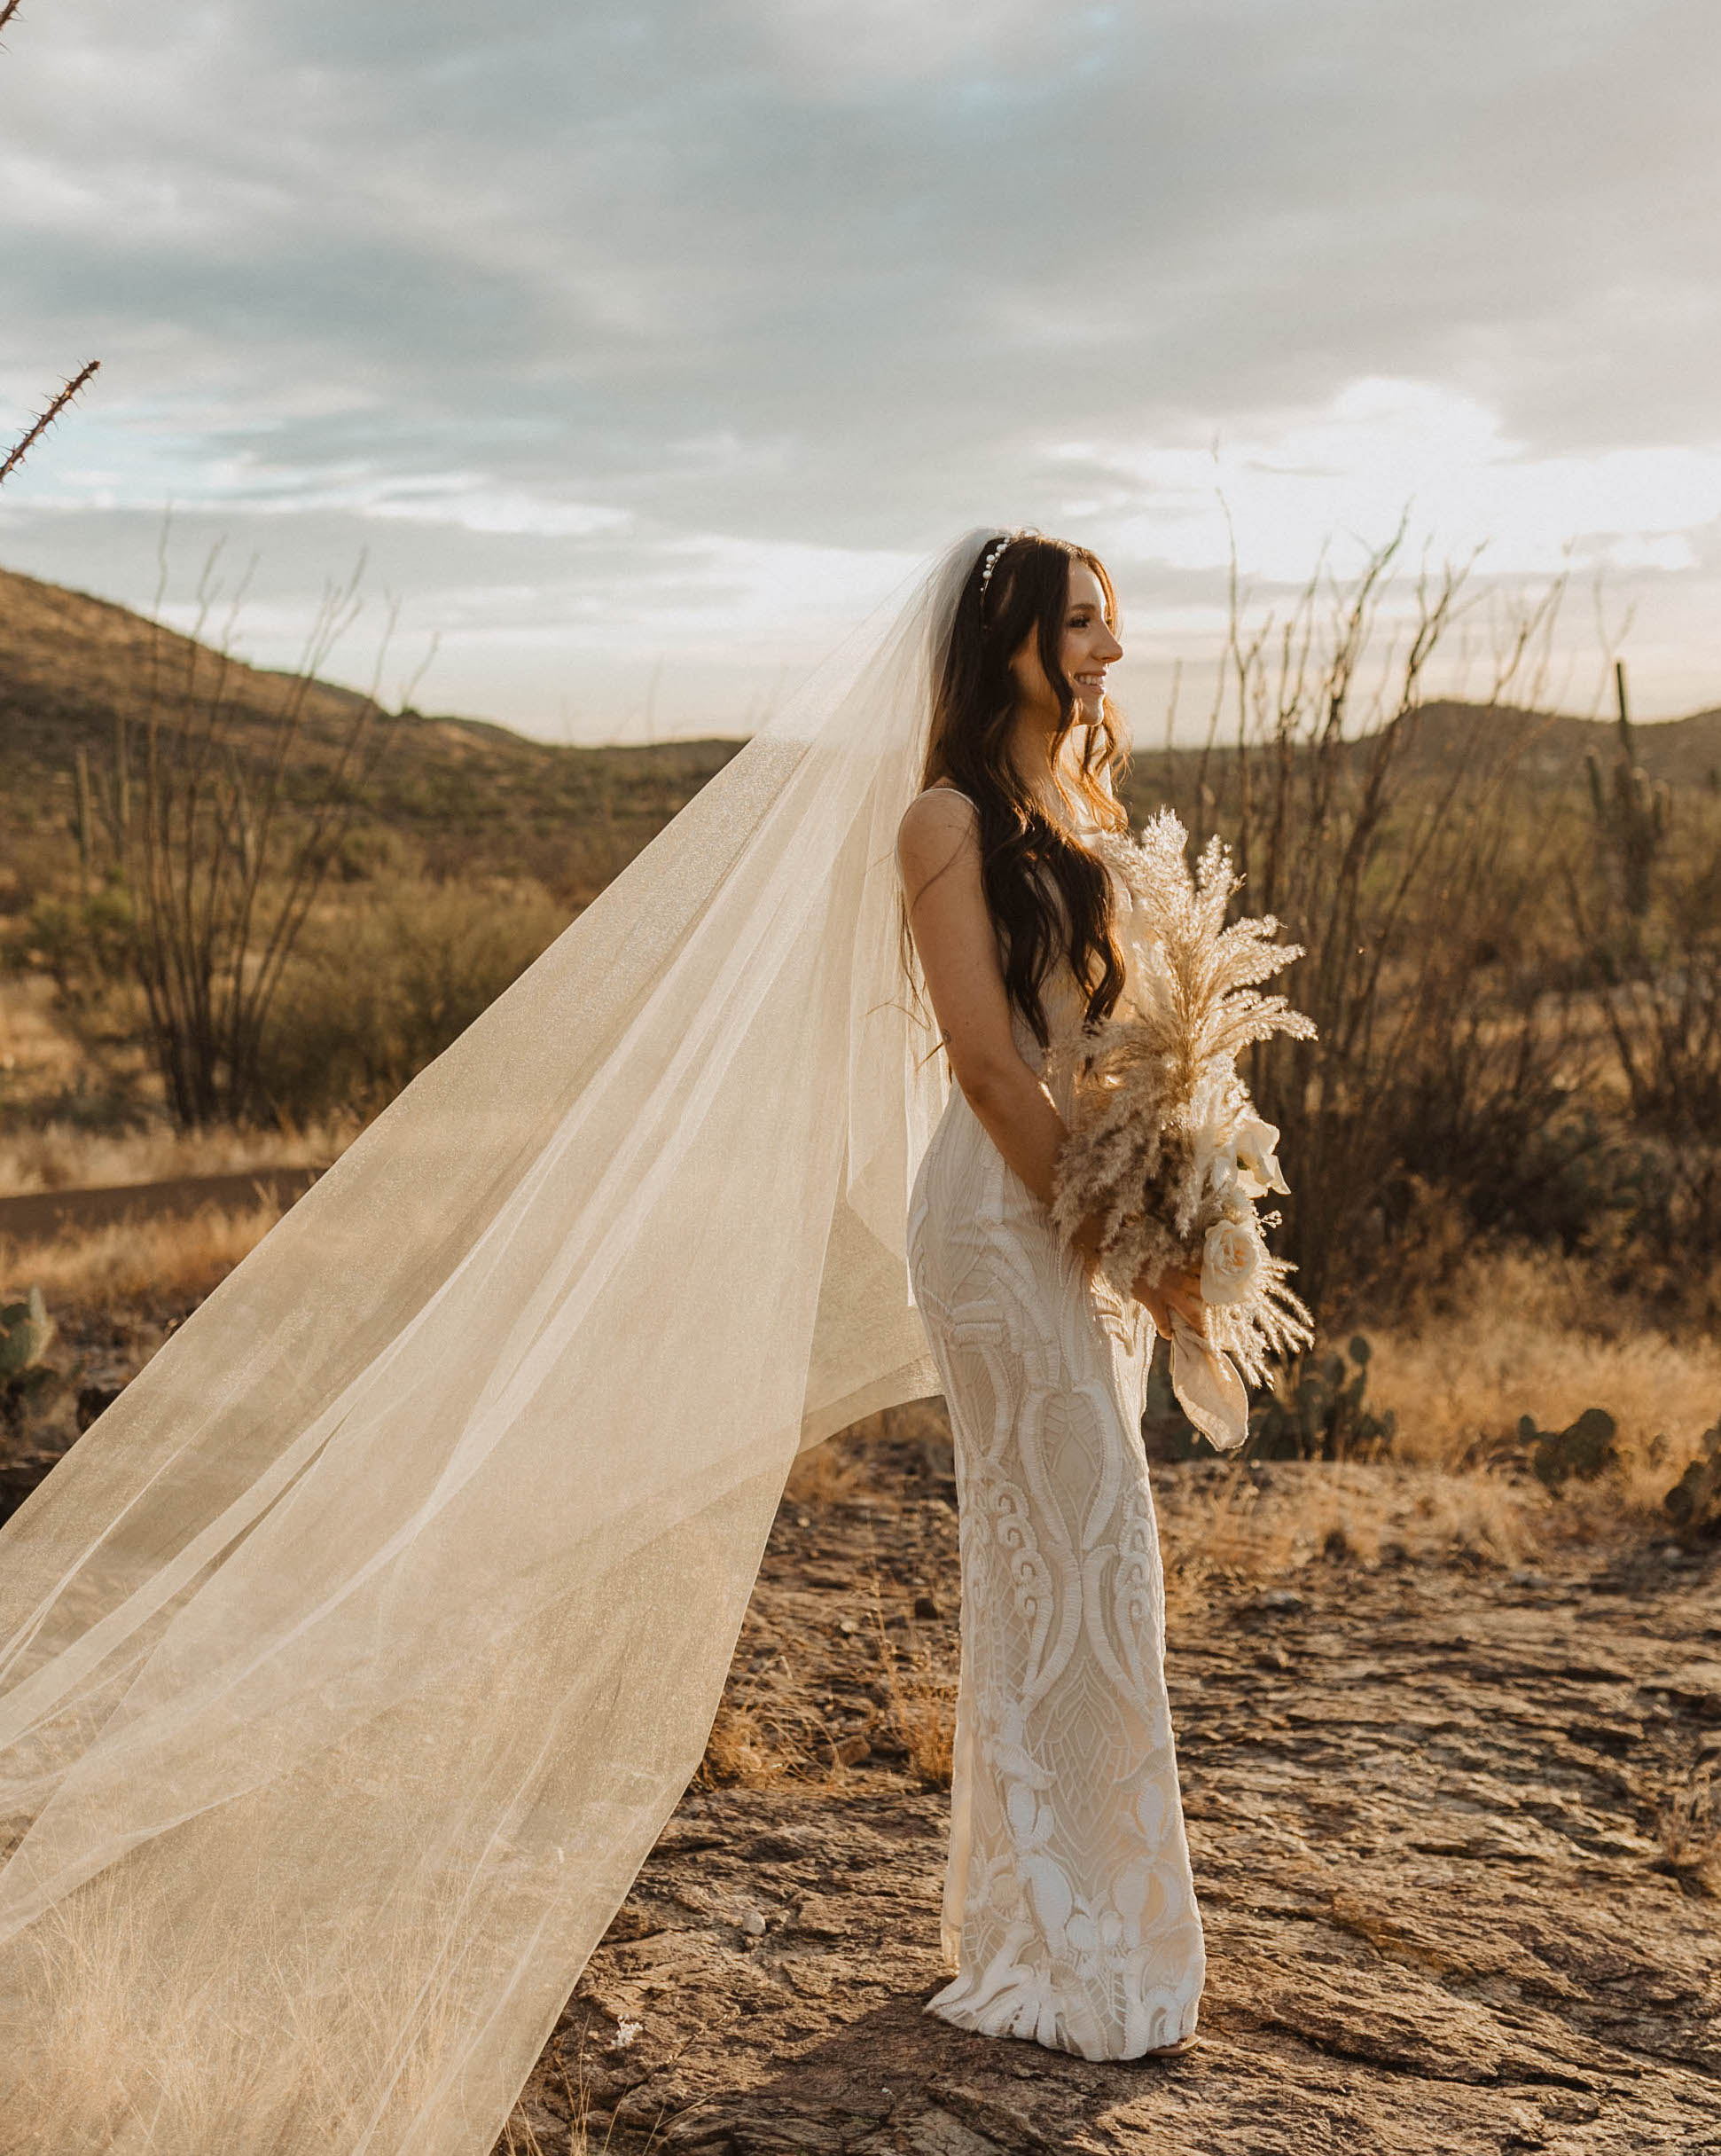 The bride (Caked Up With Riley) smiles outside in the desert sun at Saguaro National Park in Arizona. She holds a neutral bohemian style bridal bouquet.